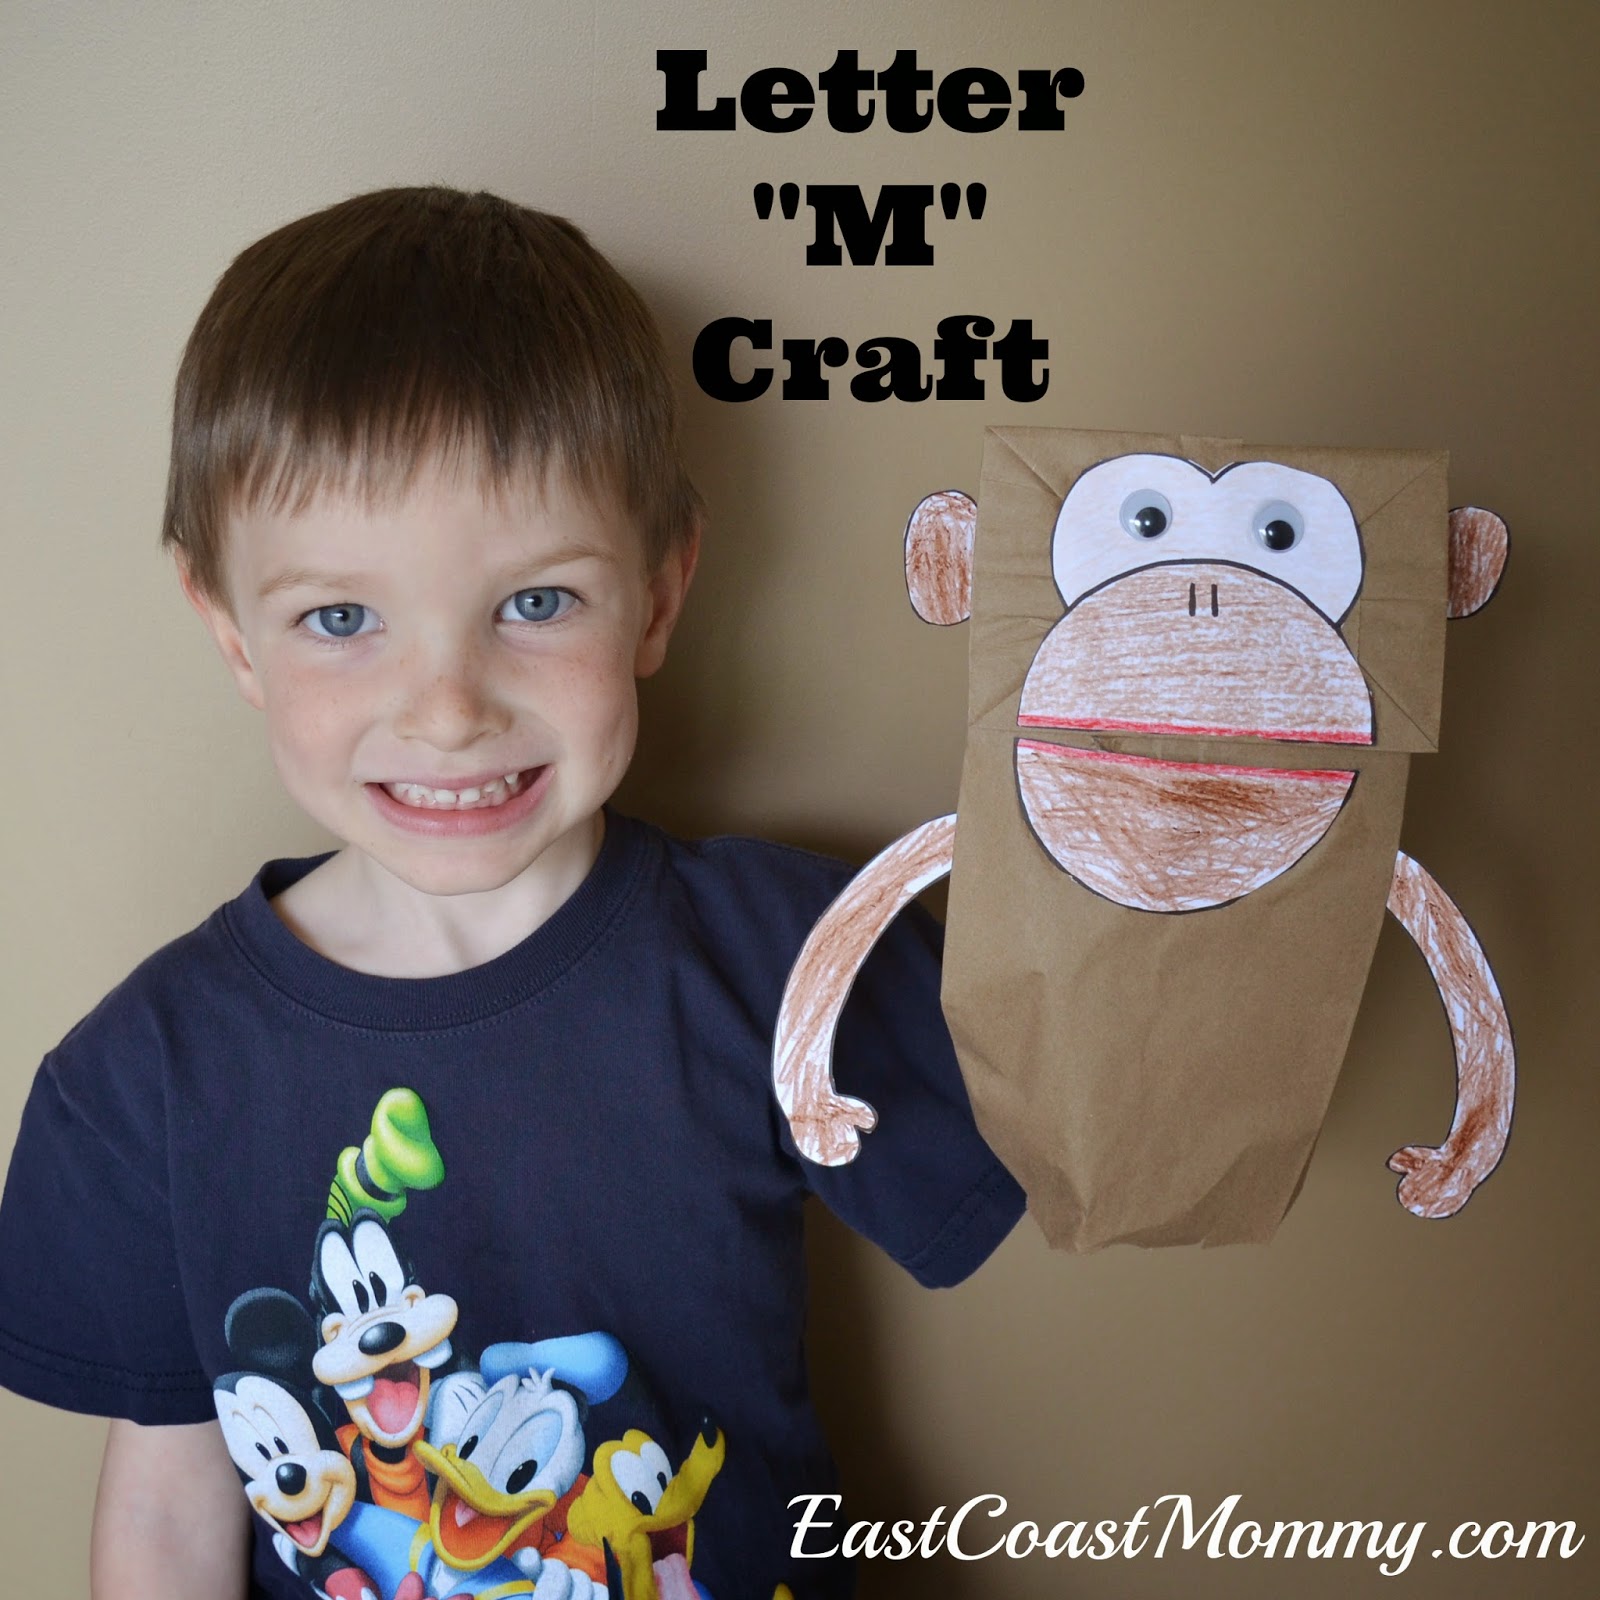 East Coast Mommy: Alphabet Crafts - Letter M